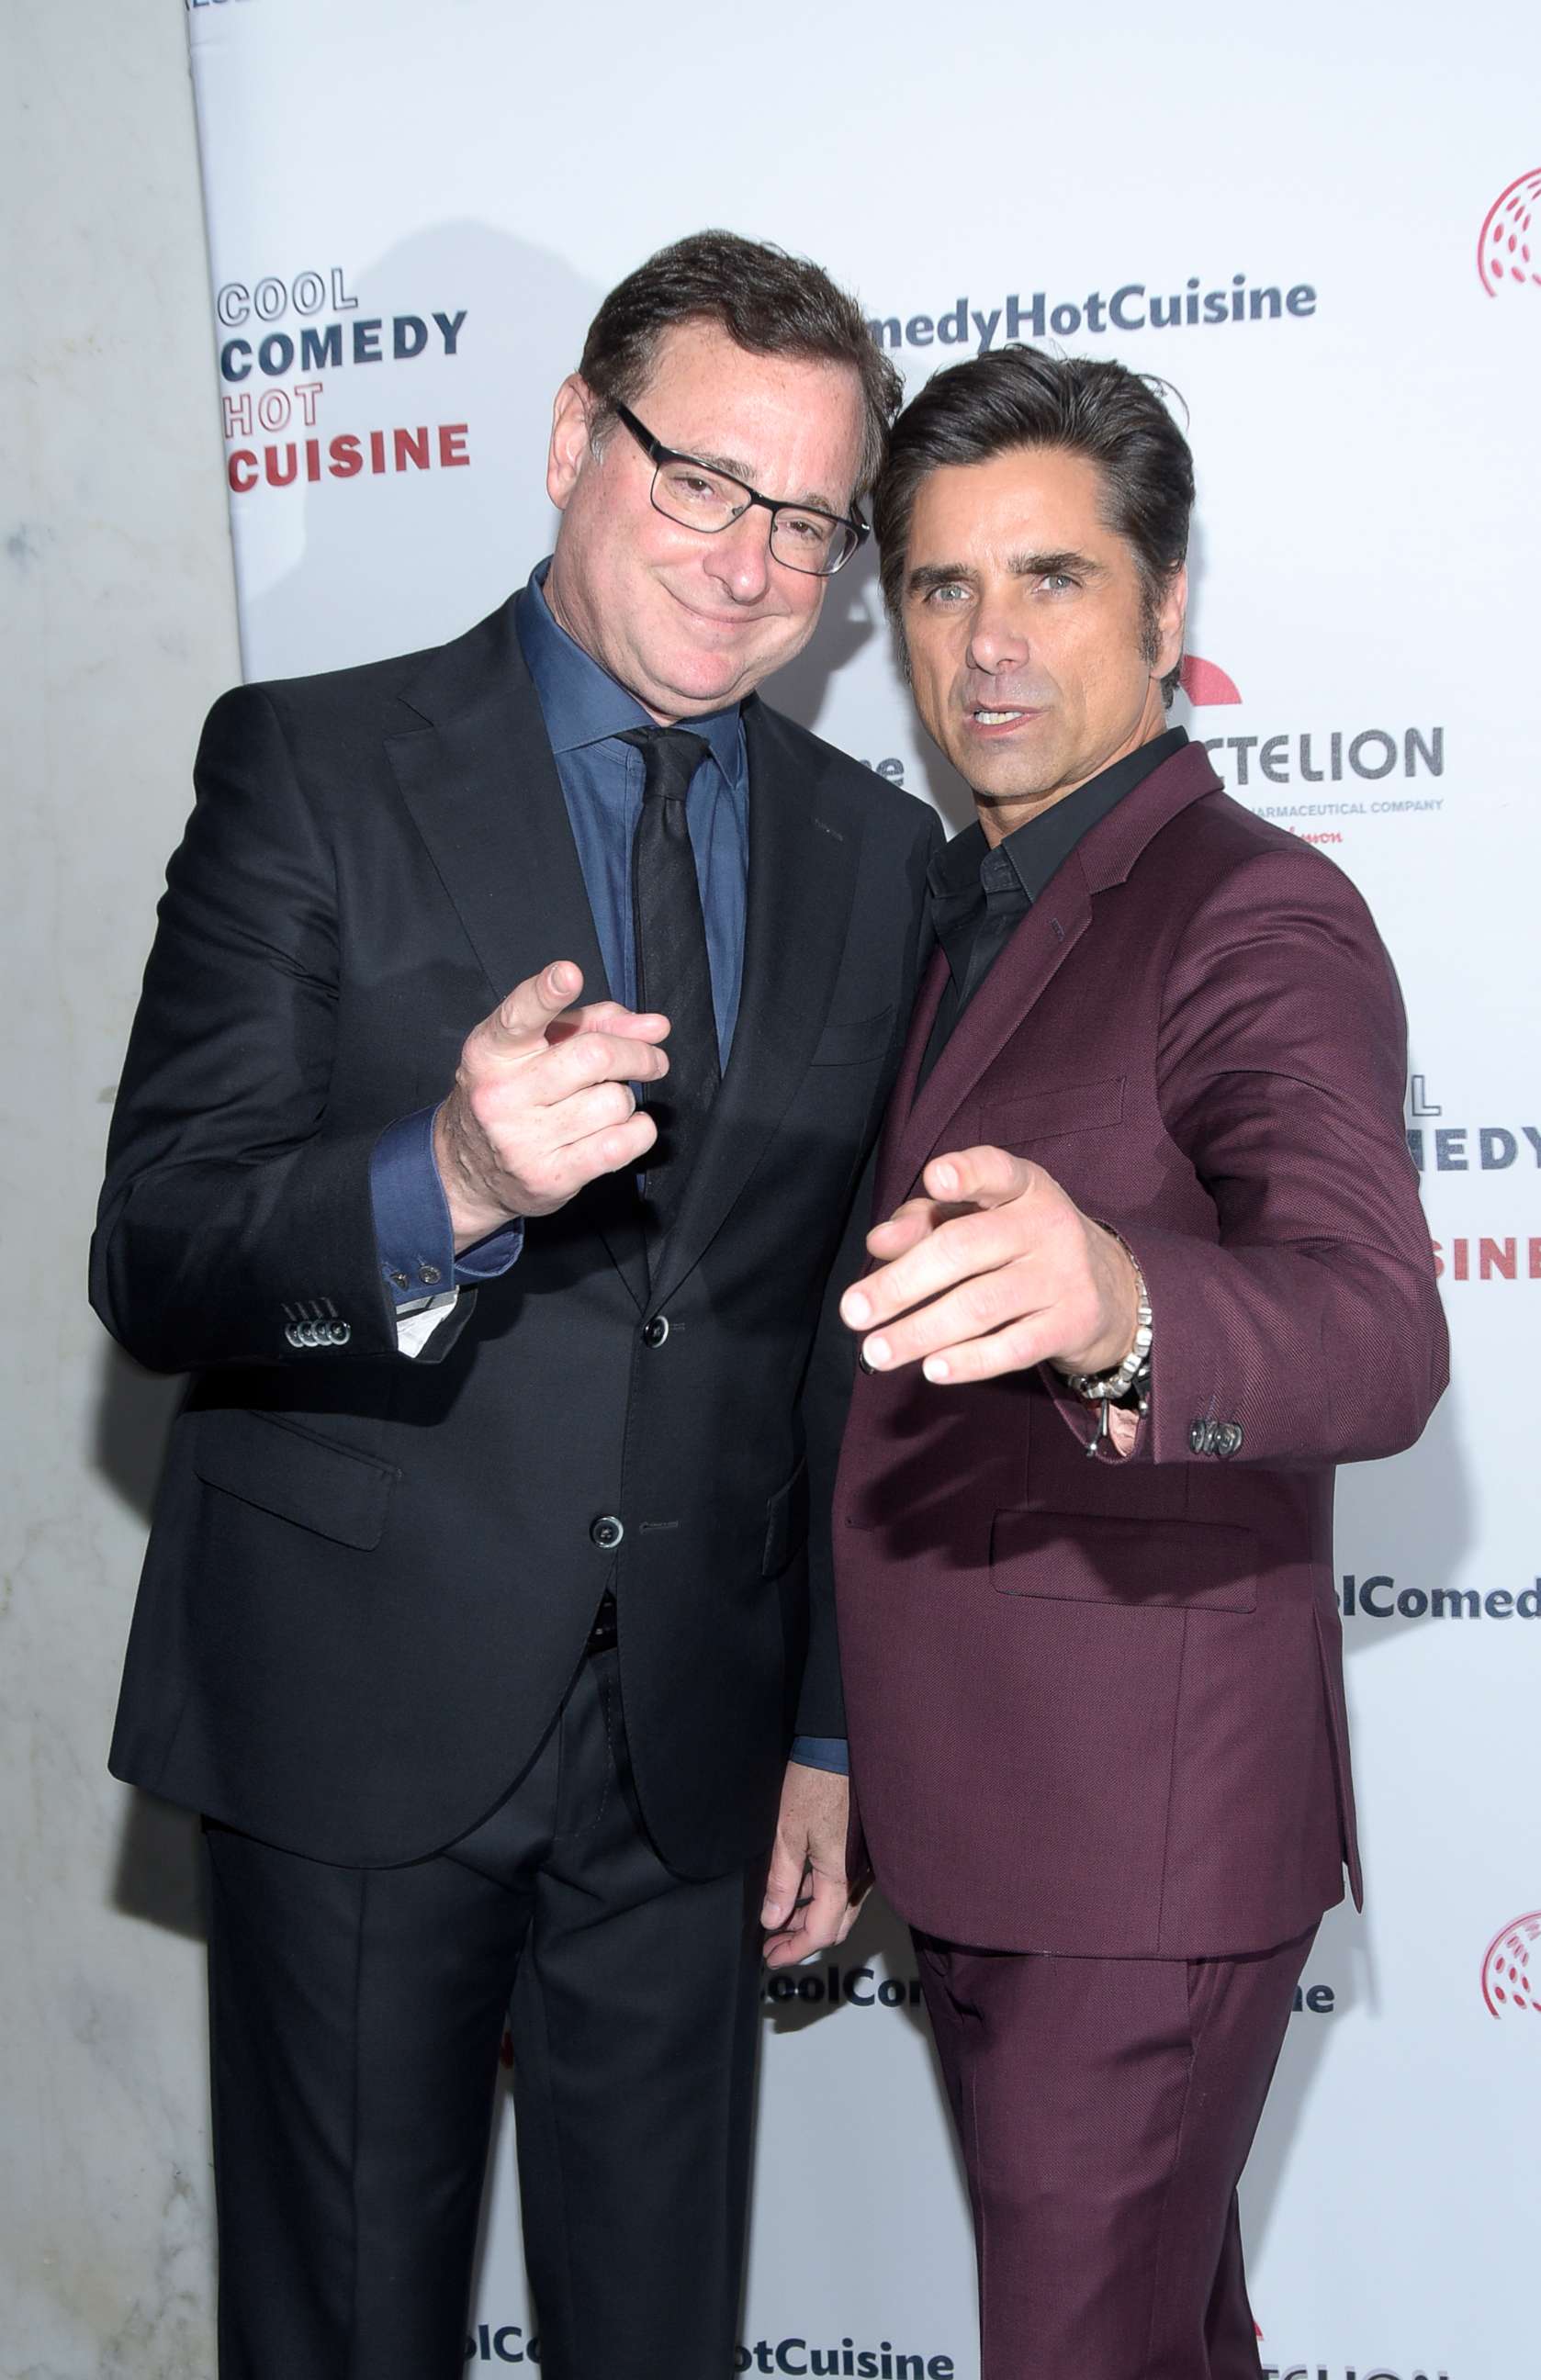 PHOTO: Bob Saget and John Stamos at the Beverly Wilshire Four Seasons Hotel on April 25, 2019 in Beverly Hills, Calif.